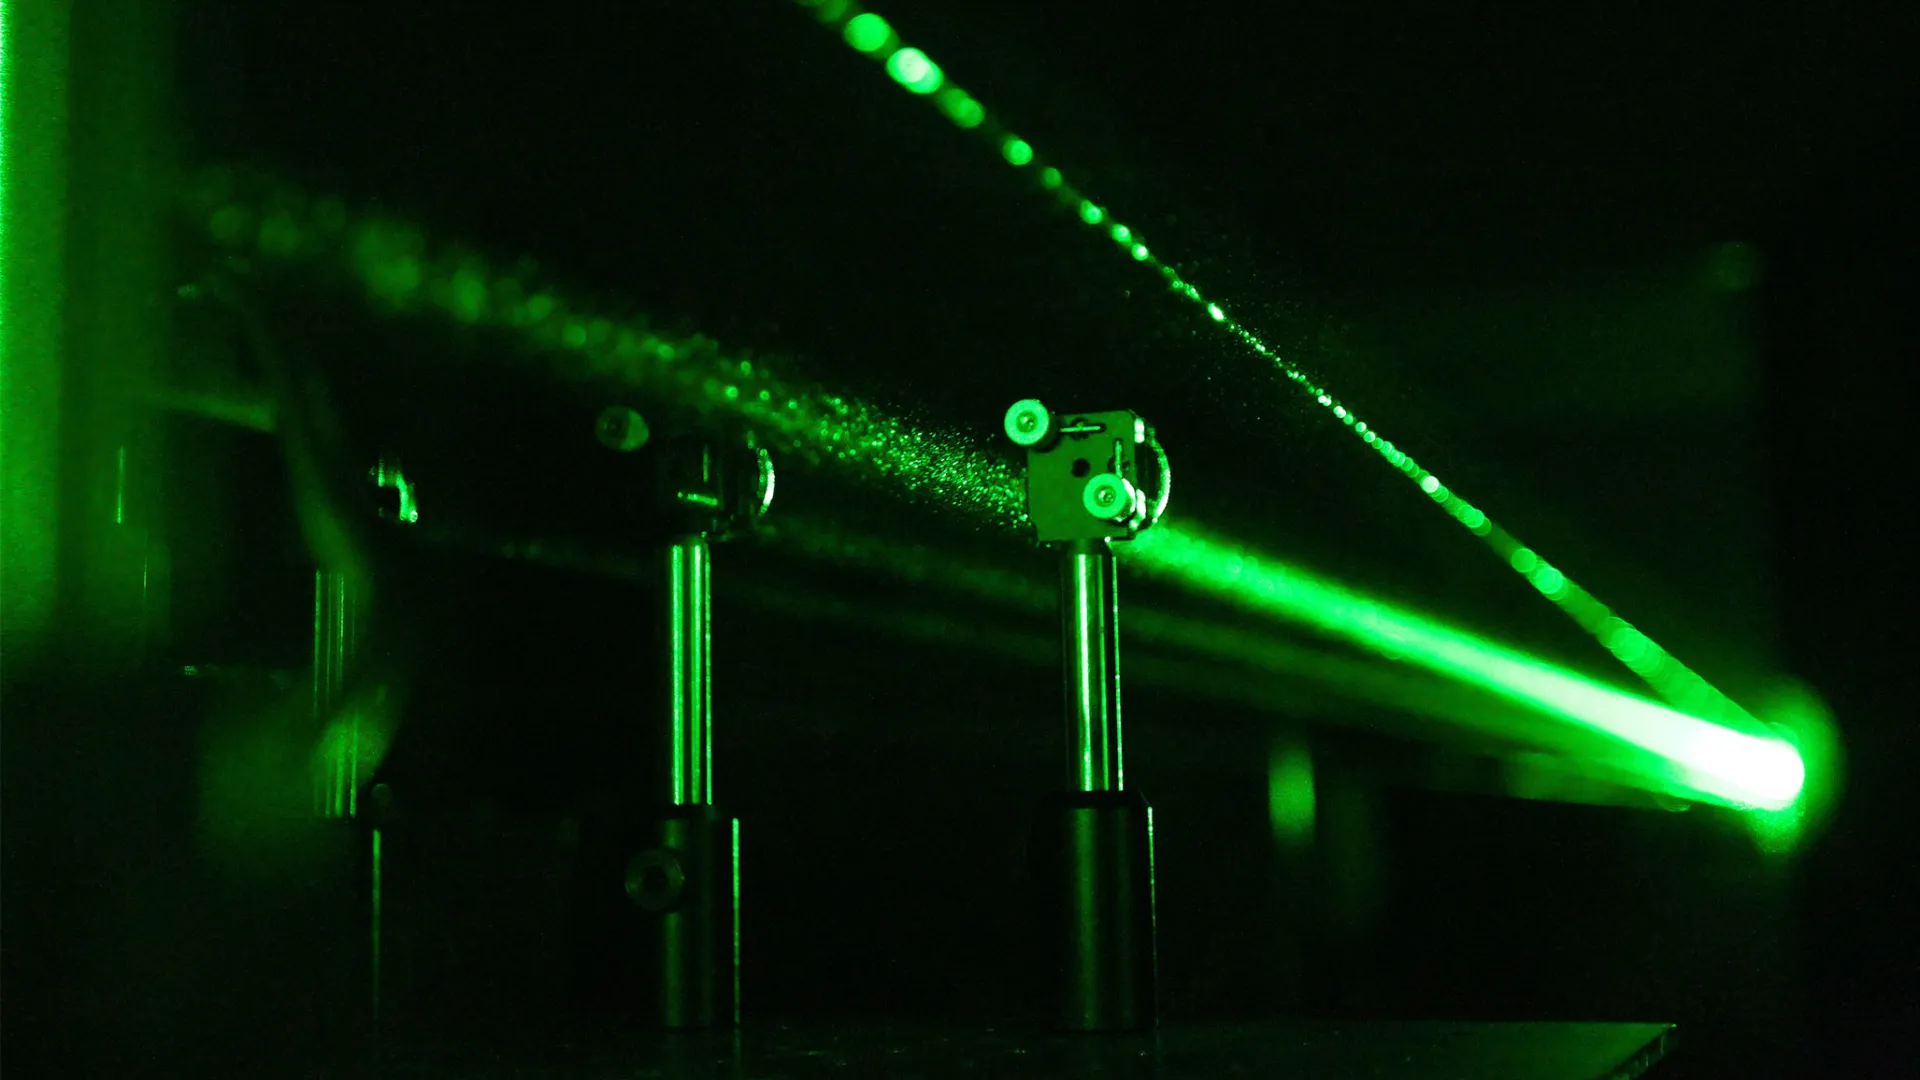 A laser experiment in a CSUSB physics lab. The university is hosting 38 students from Riverside City College for a Summer Research Experience, a program coordinated by the CSUSB Office of Student Research.